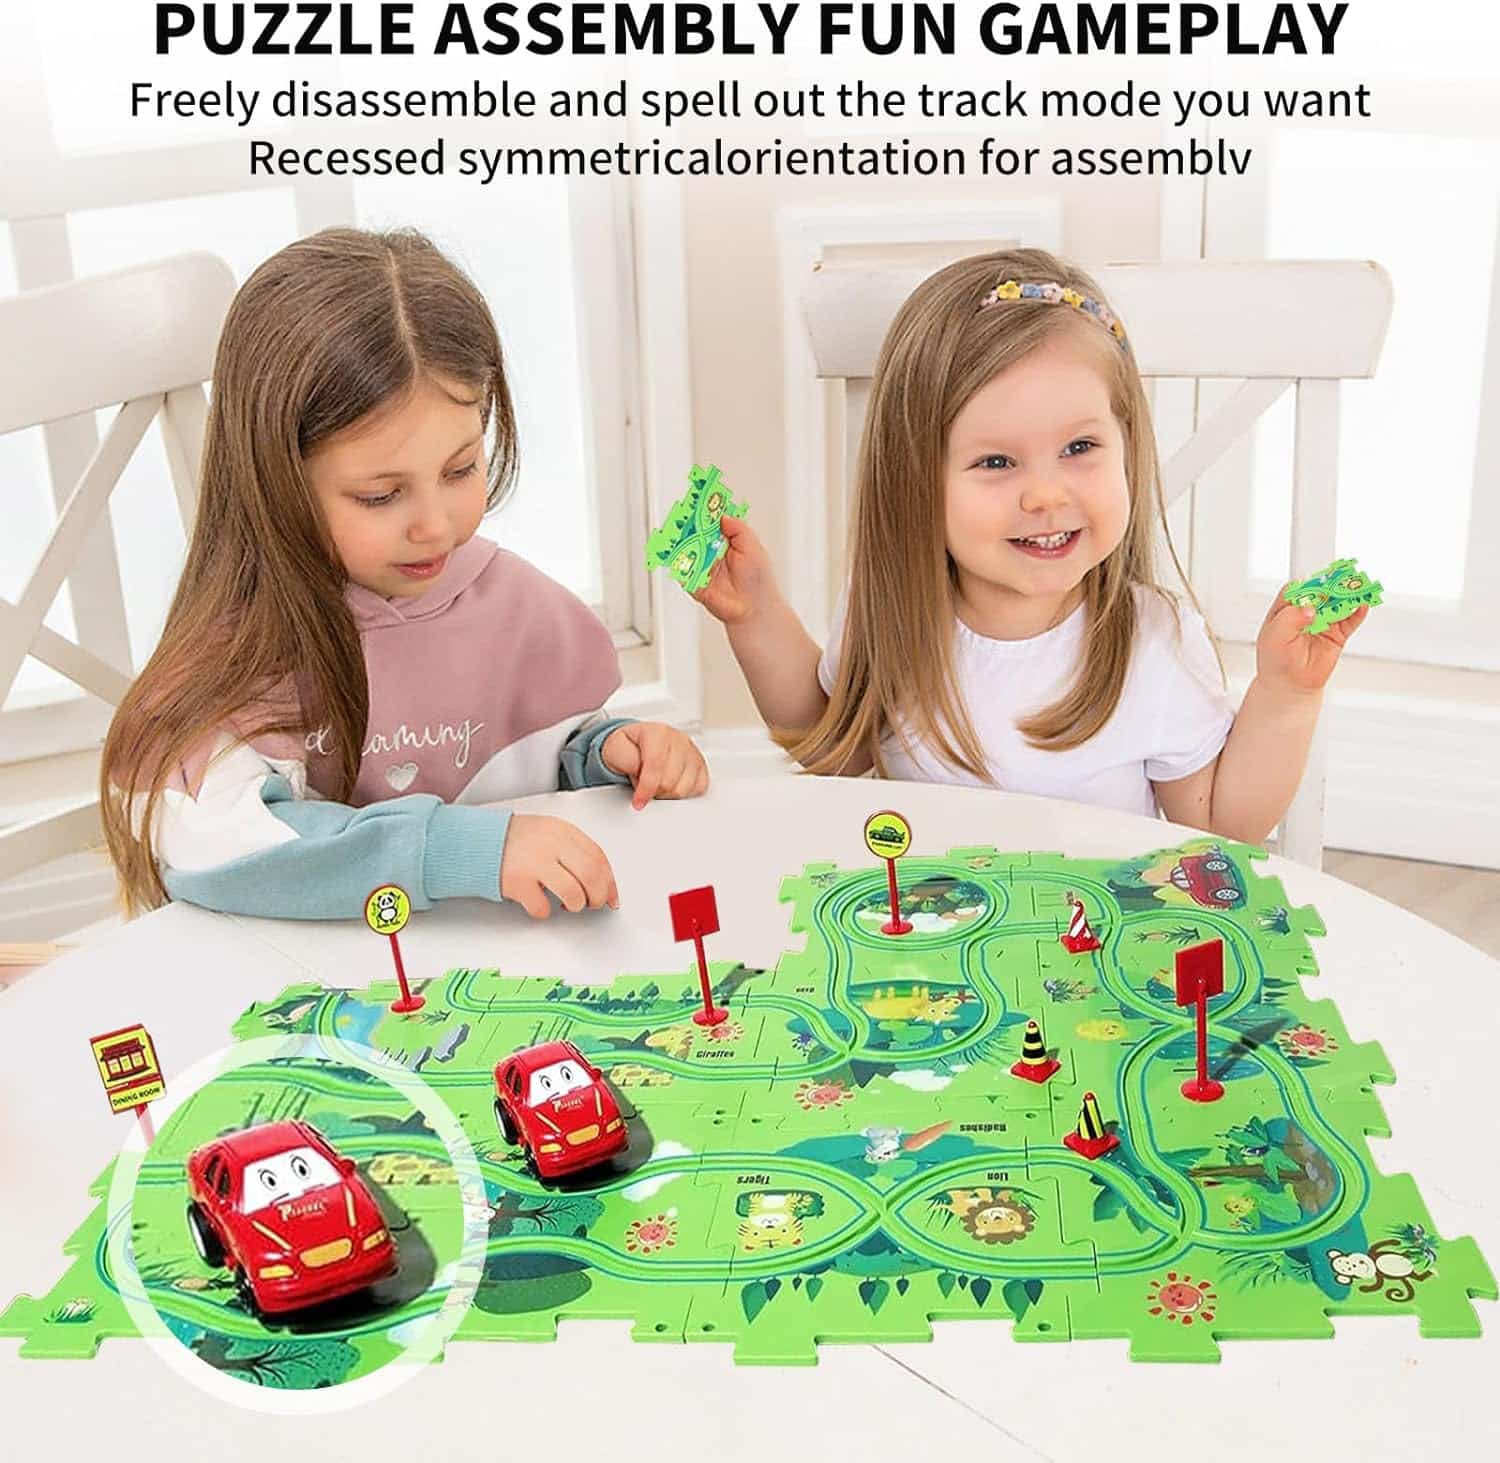 Children's Educational Puzzle Track Car Play Set - The Perfect Toy for Developing Skills